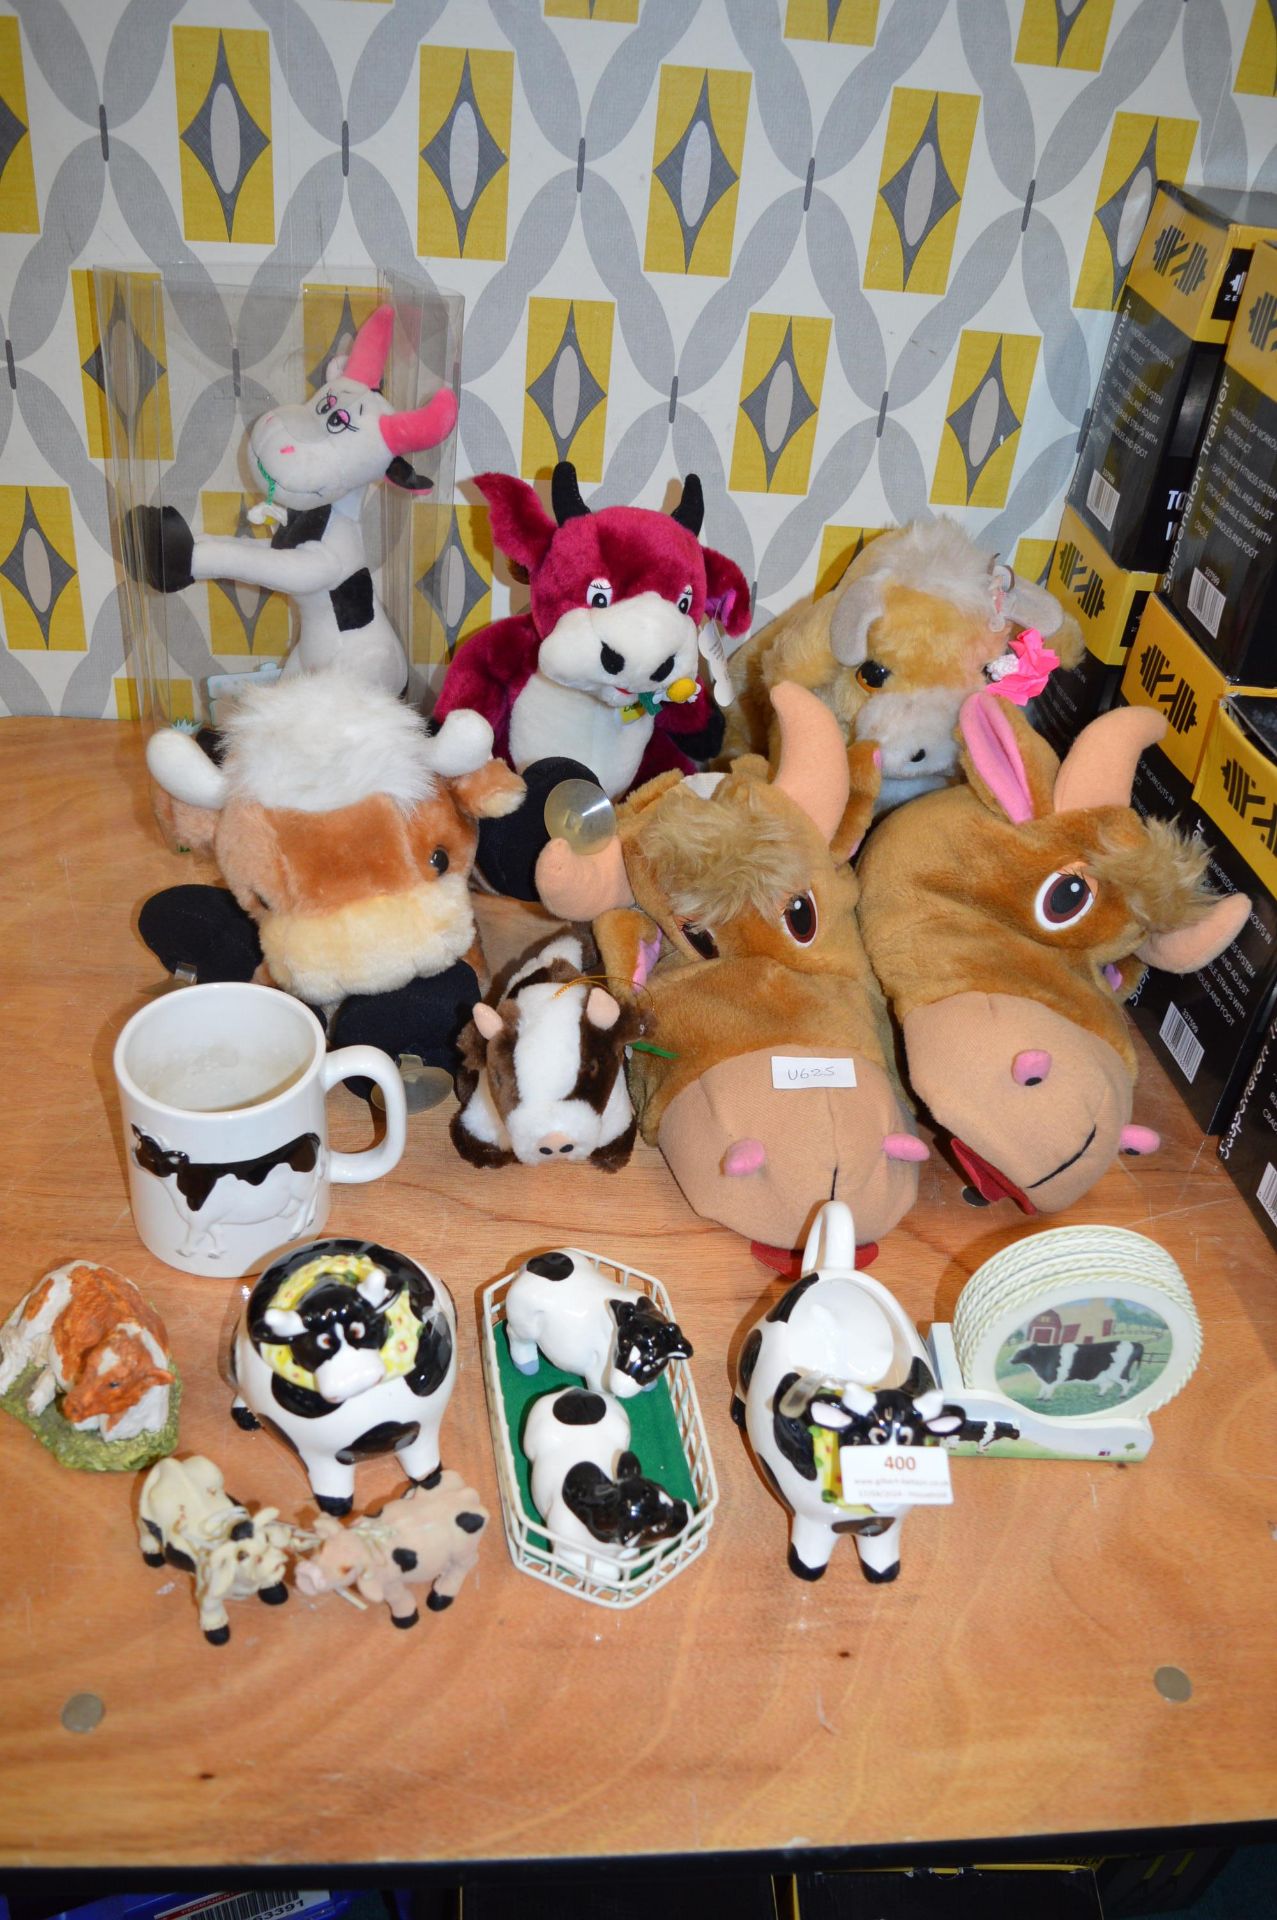 Cow Ornaments and Soft Toys etc.